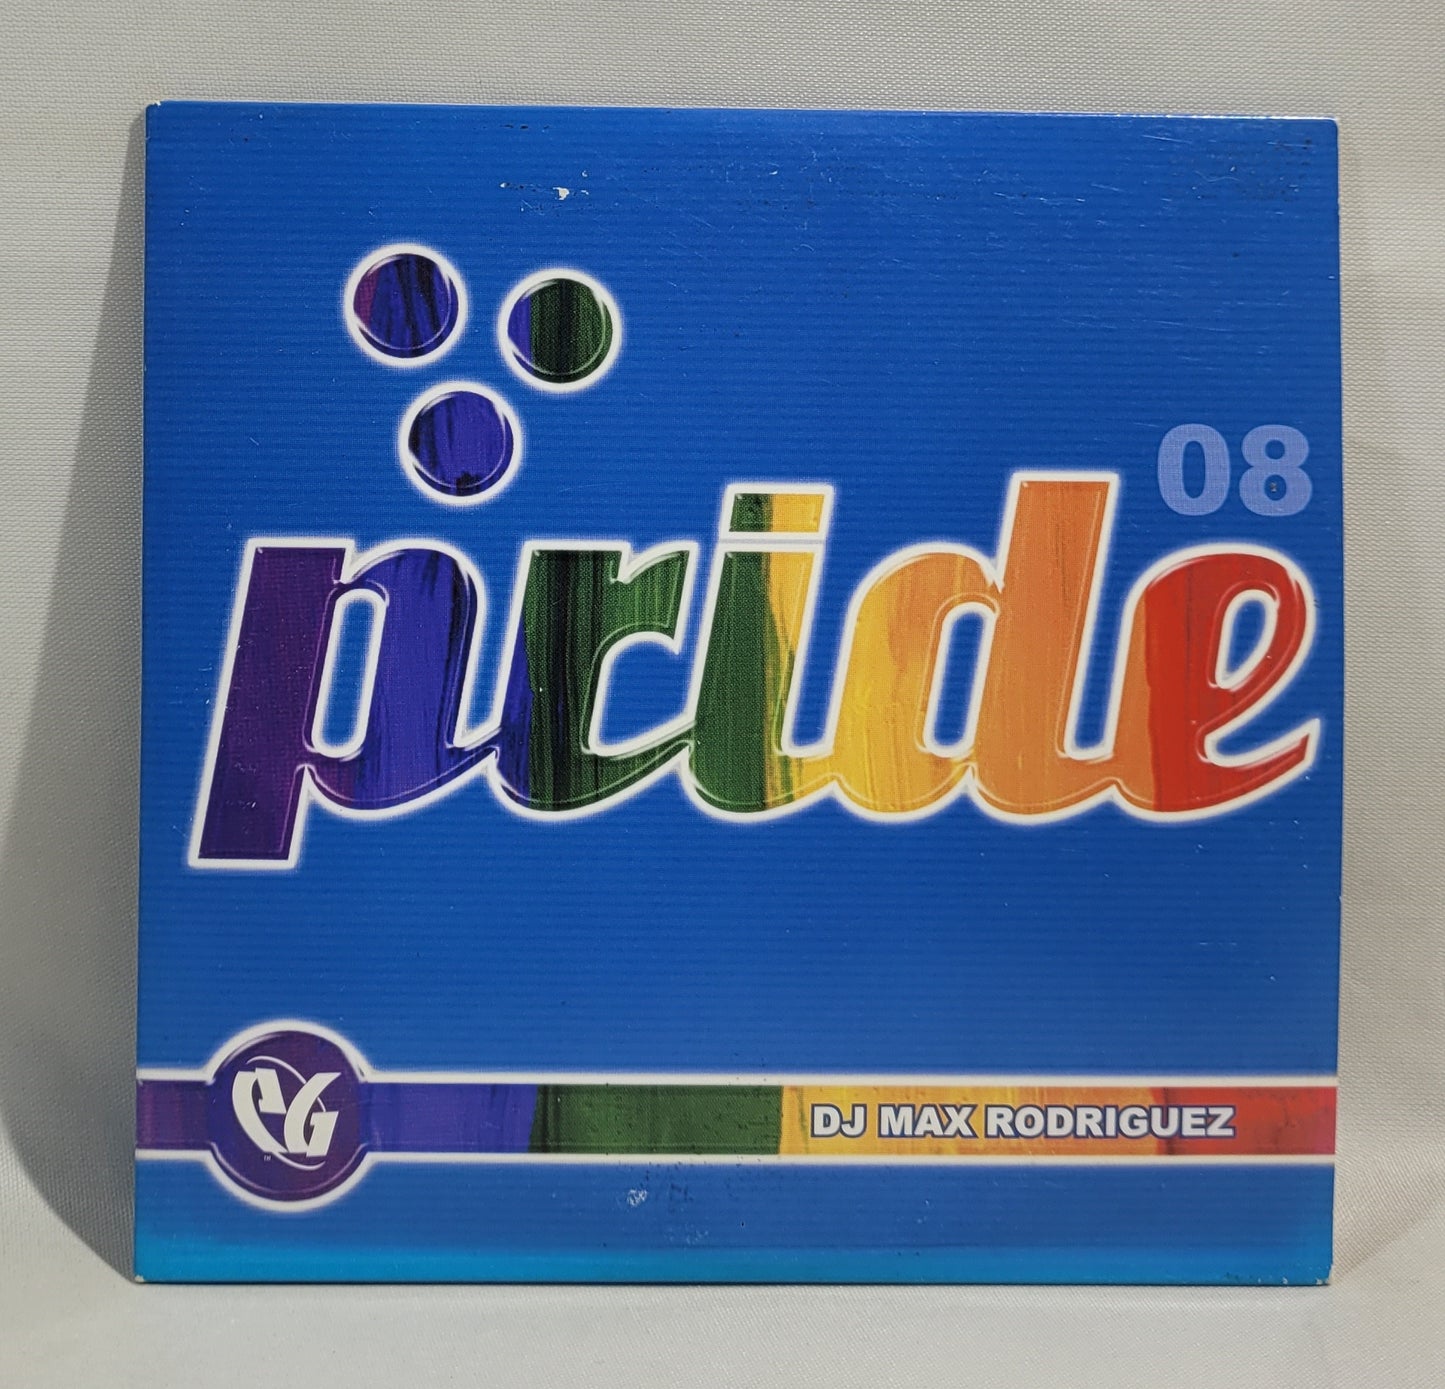 Various - Party Groove: Pride 08 [Promo] [CD]